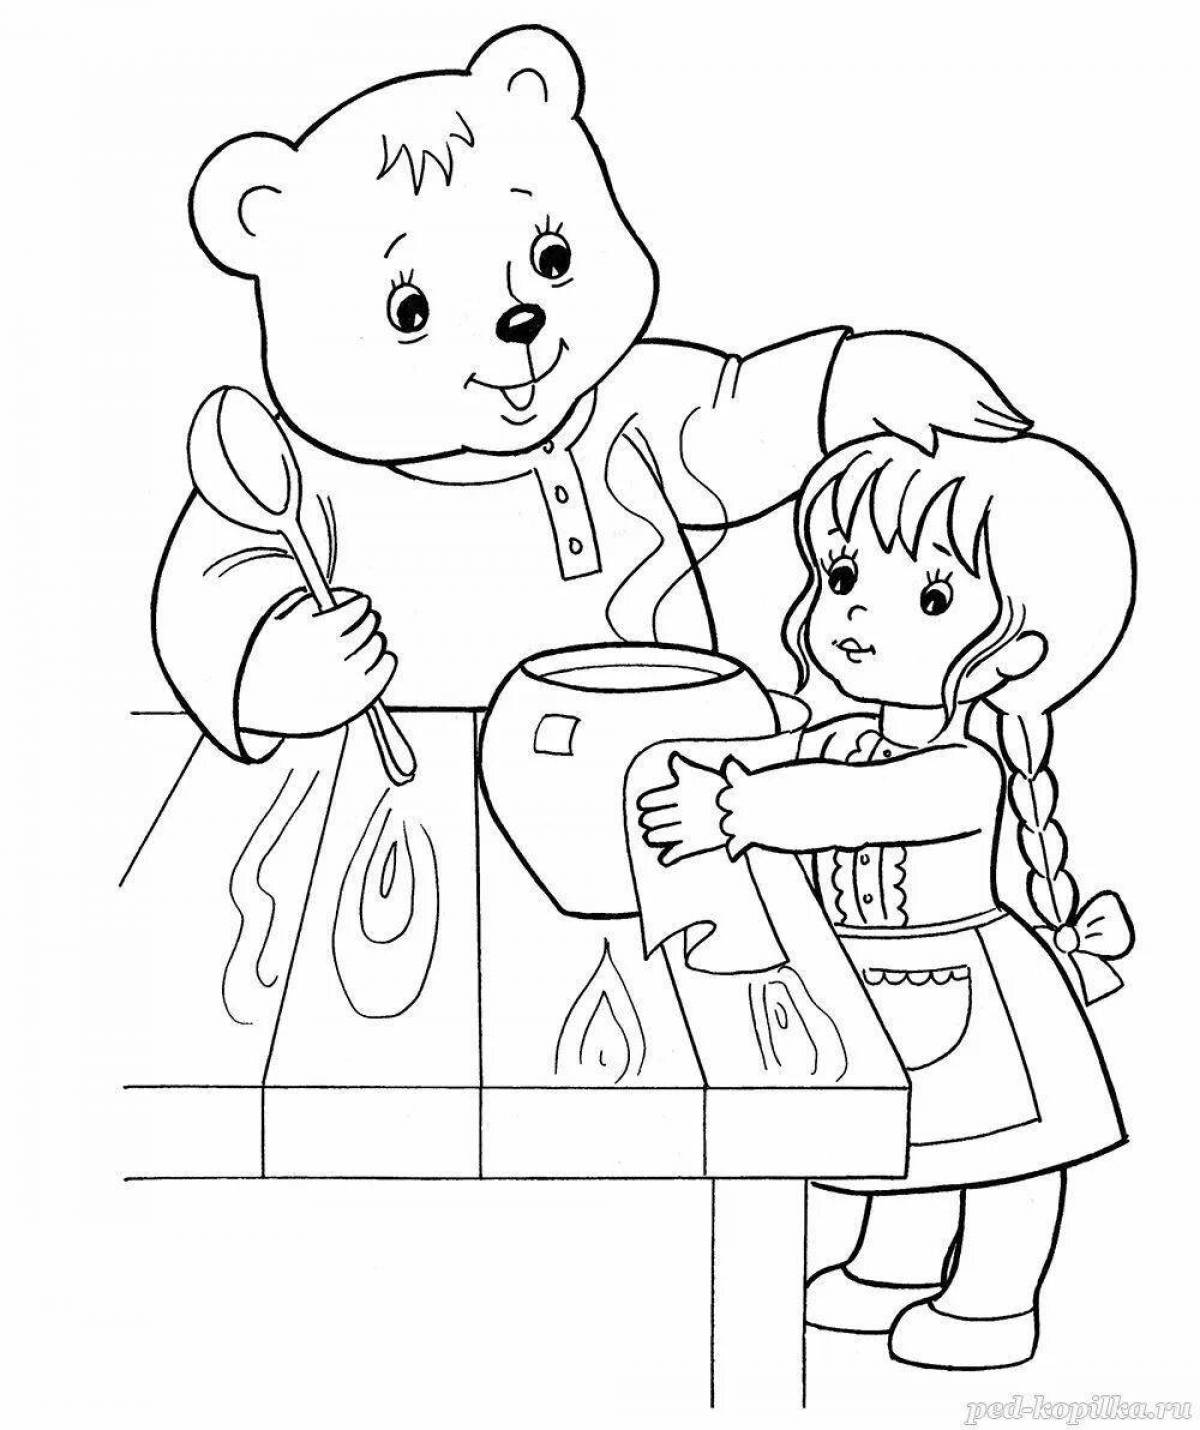 Exciting three bears coloring book for kids